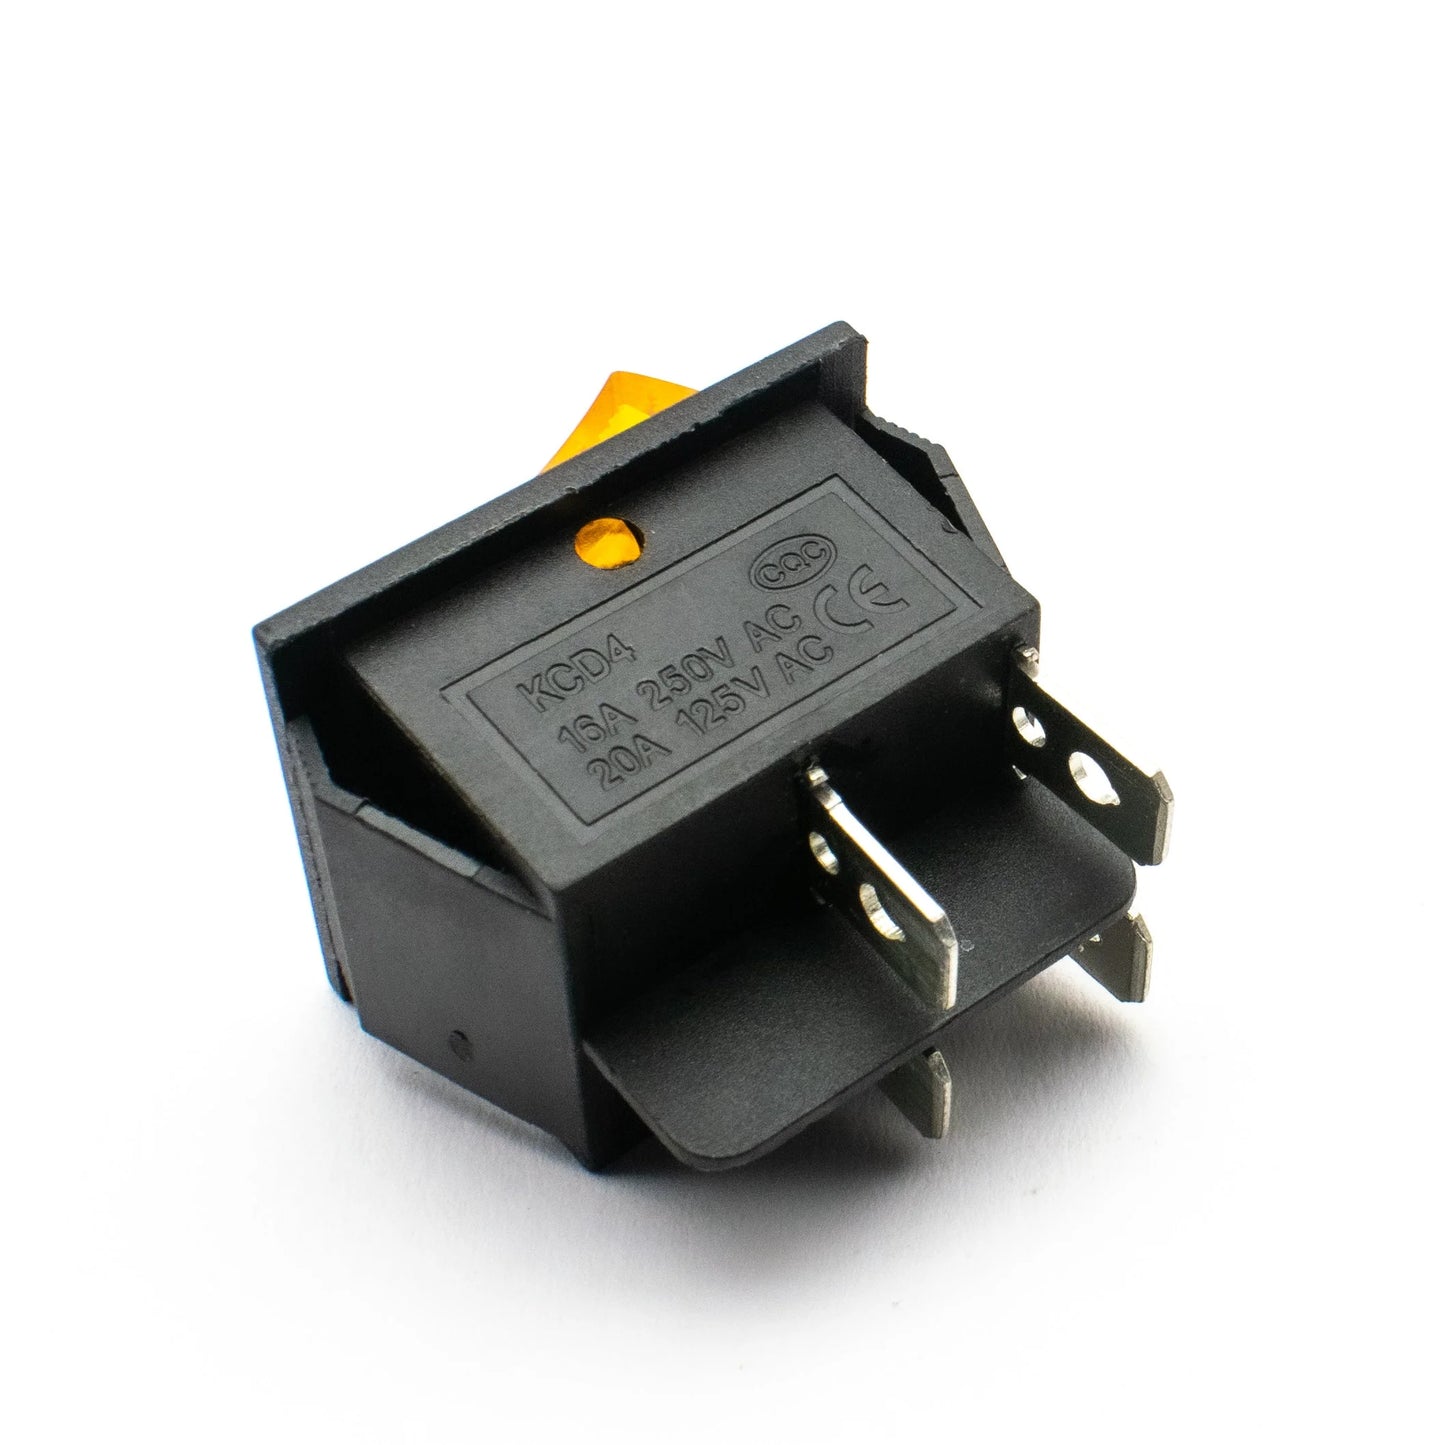 KCD4 16A 250V DPST ON-OFF Rocker Switch with Yellow Light